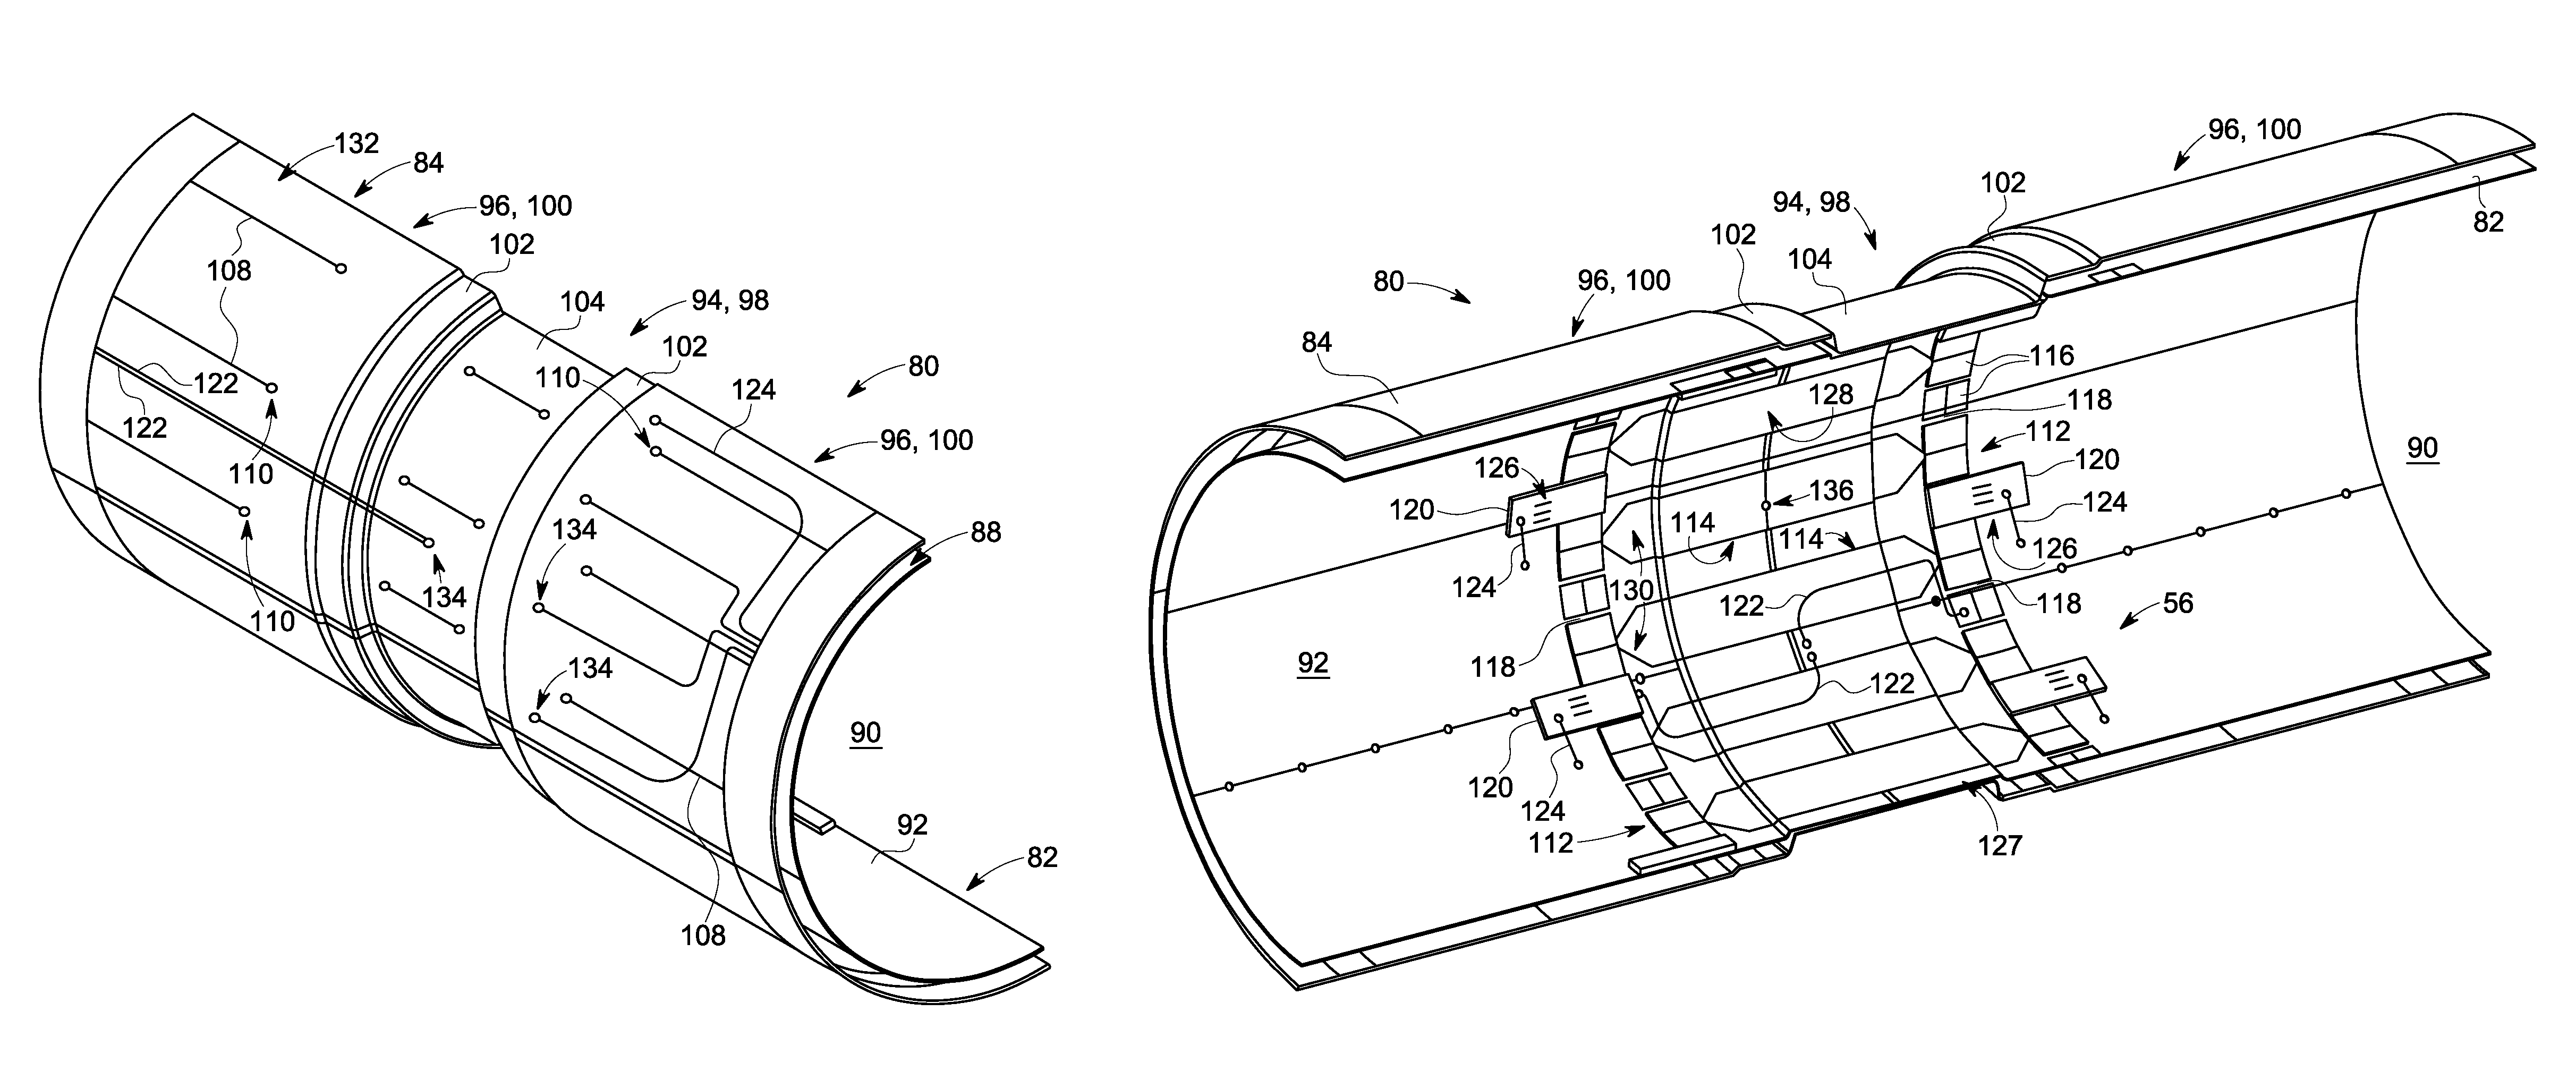 Structured RF coil assembly for MRI scanner